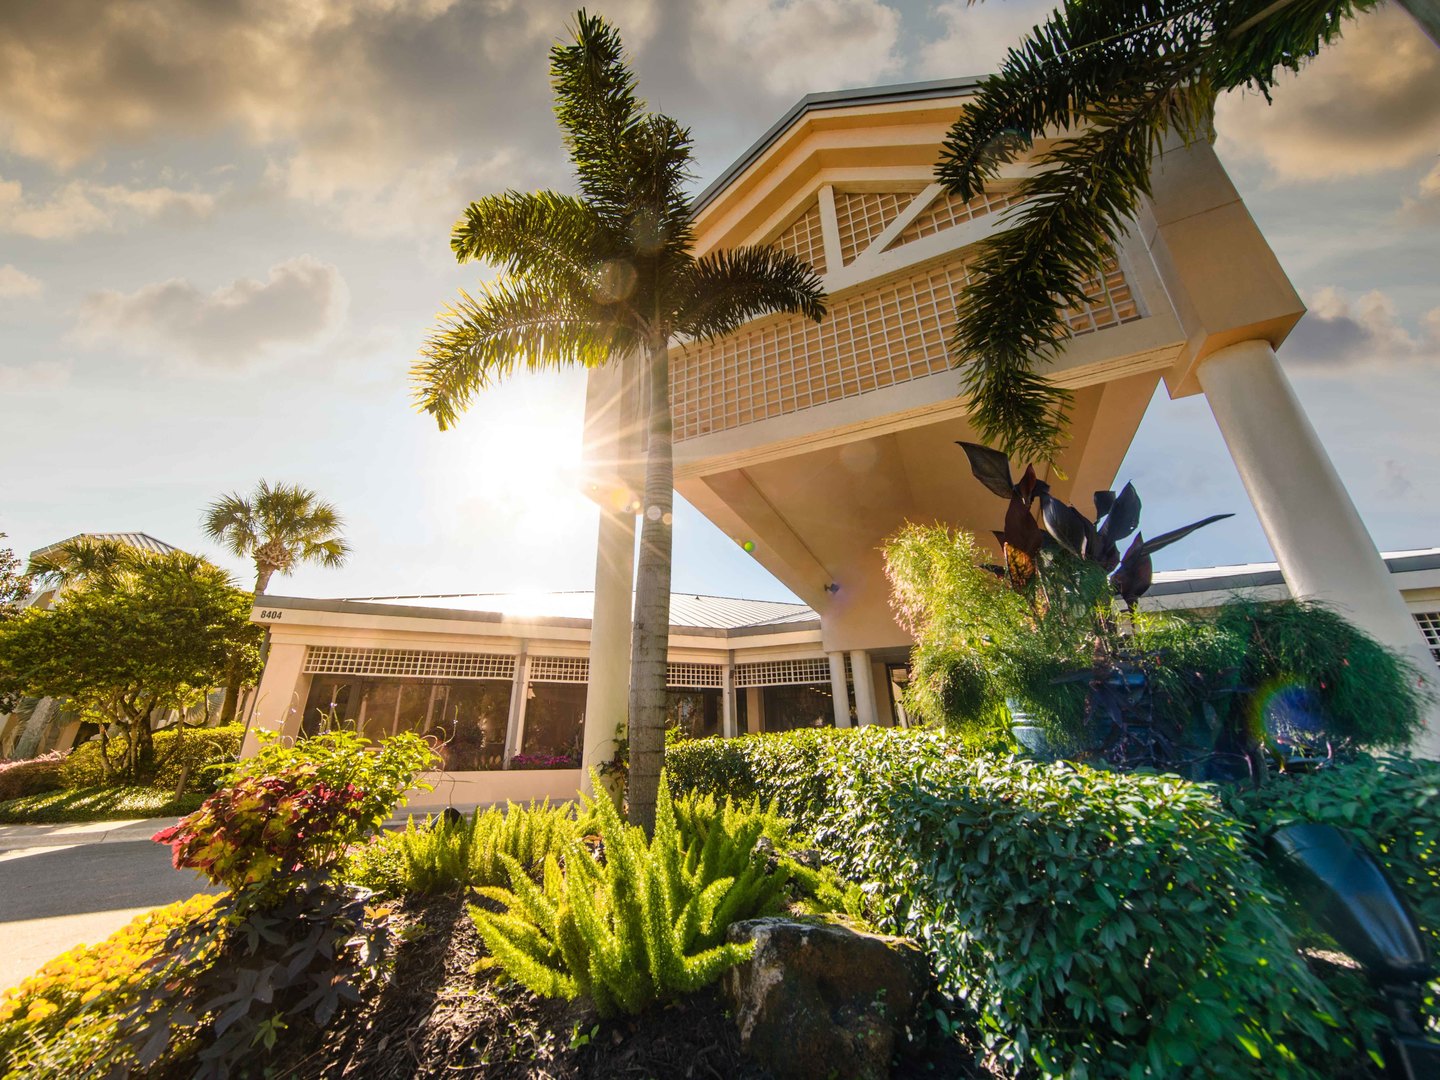 Marriott's Royal Palms Resort Entrance. Marriott's Royal Palms is located in Orlando, Florida United States.